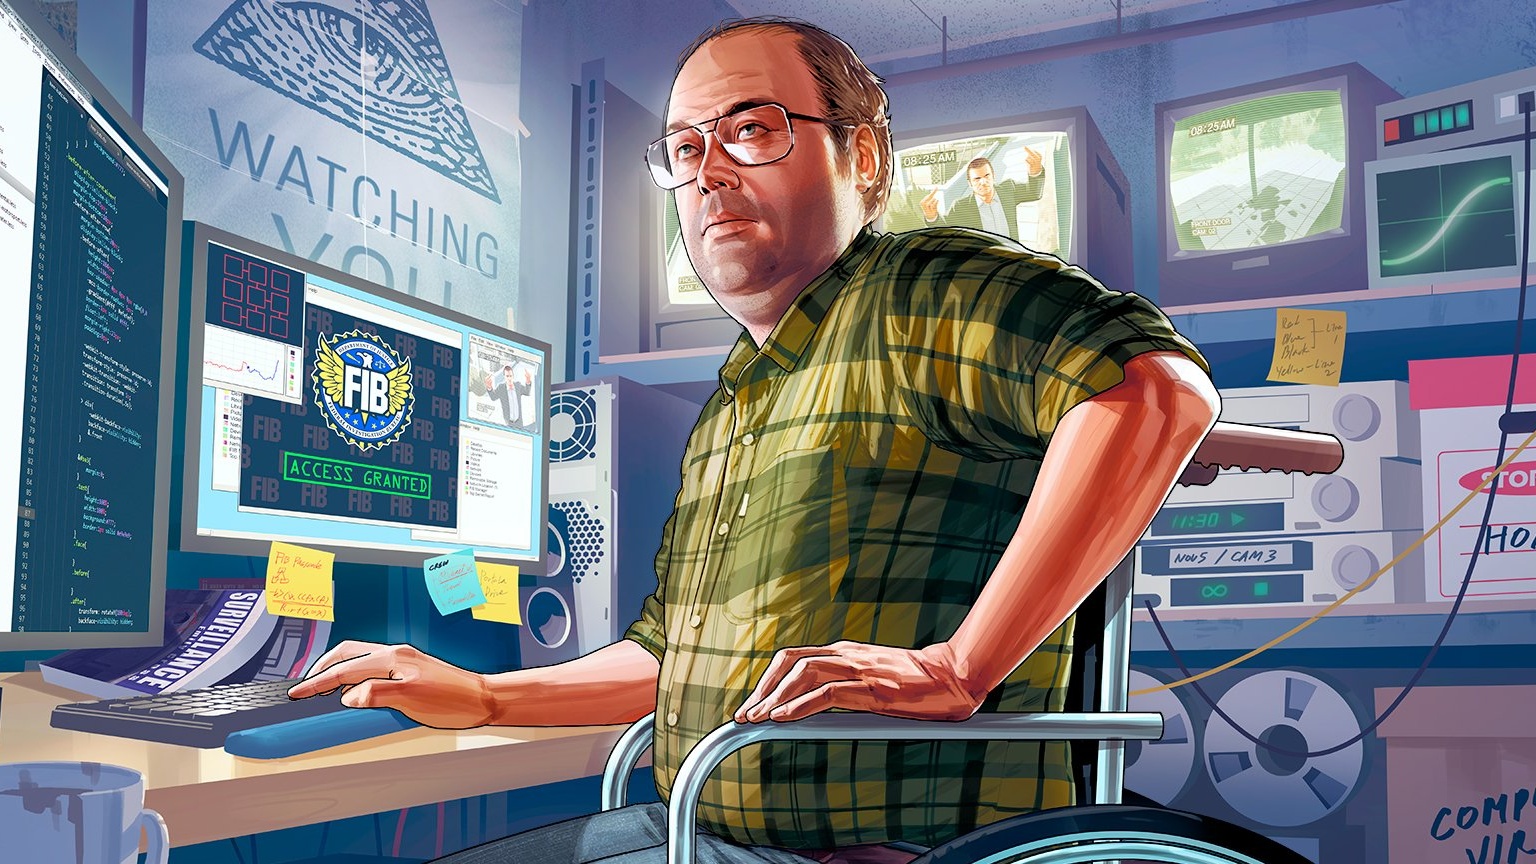  GTA Online patch aims to fix exploit that let hackers steal money and corrupt accounts 